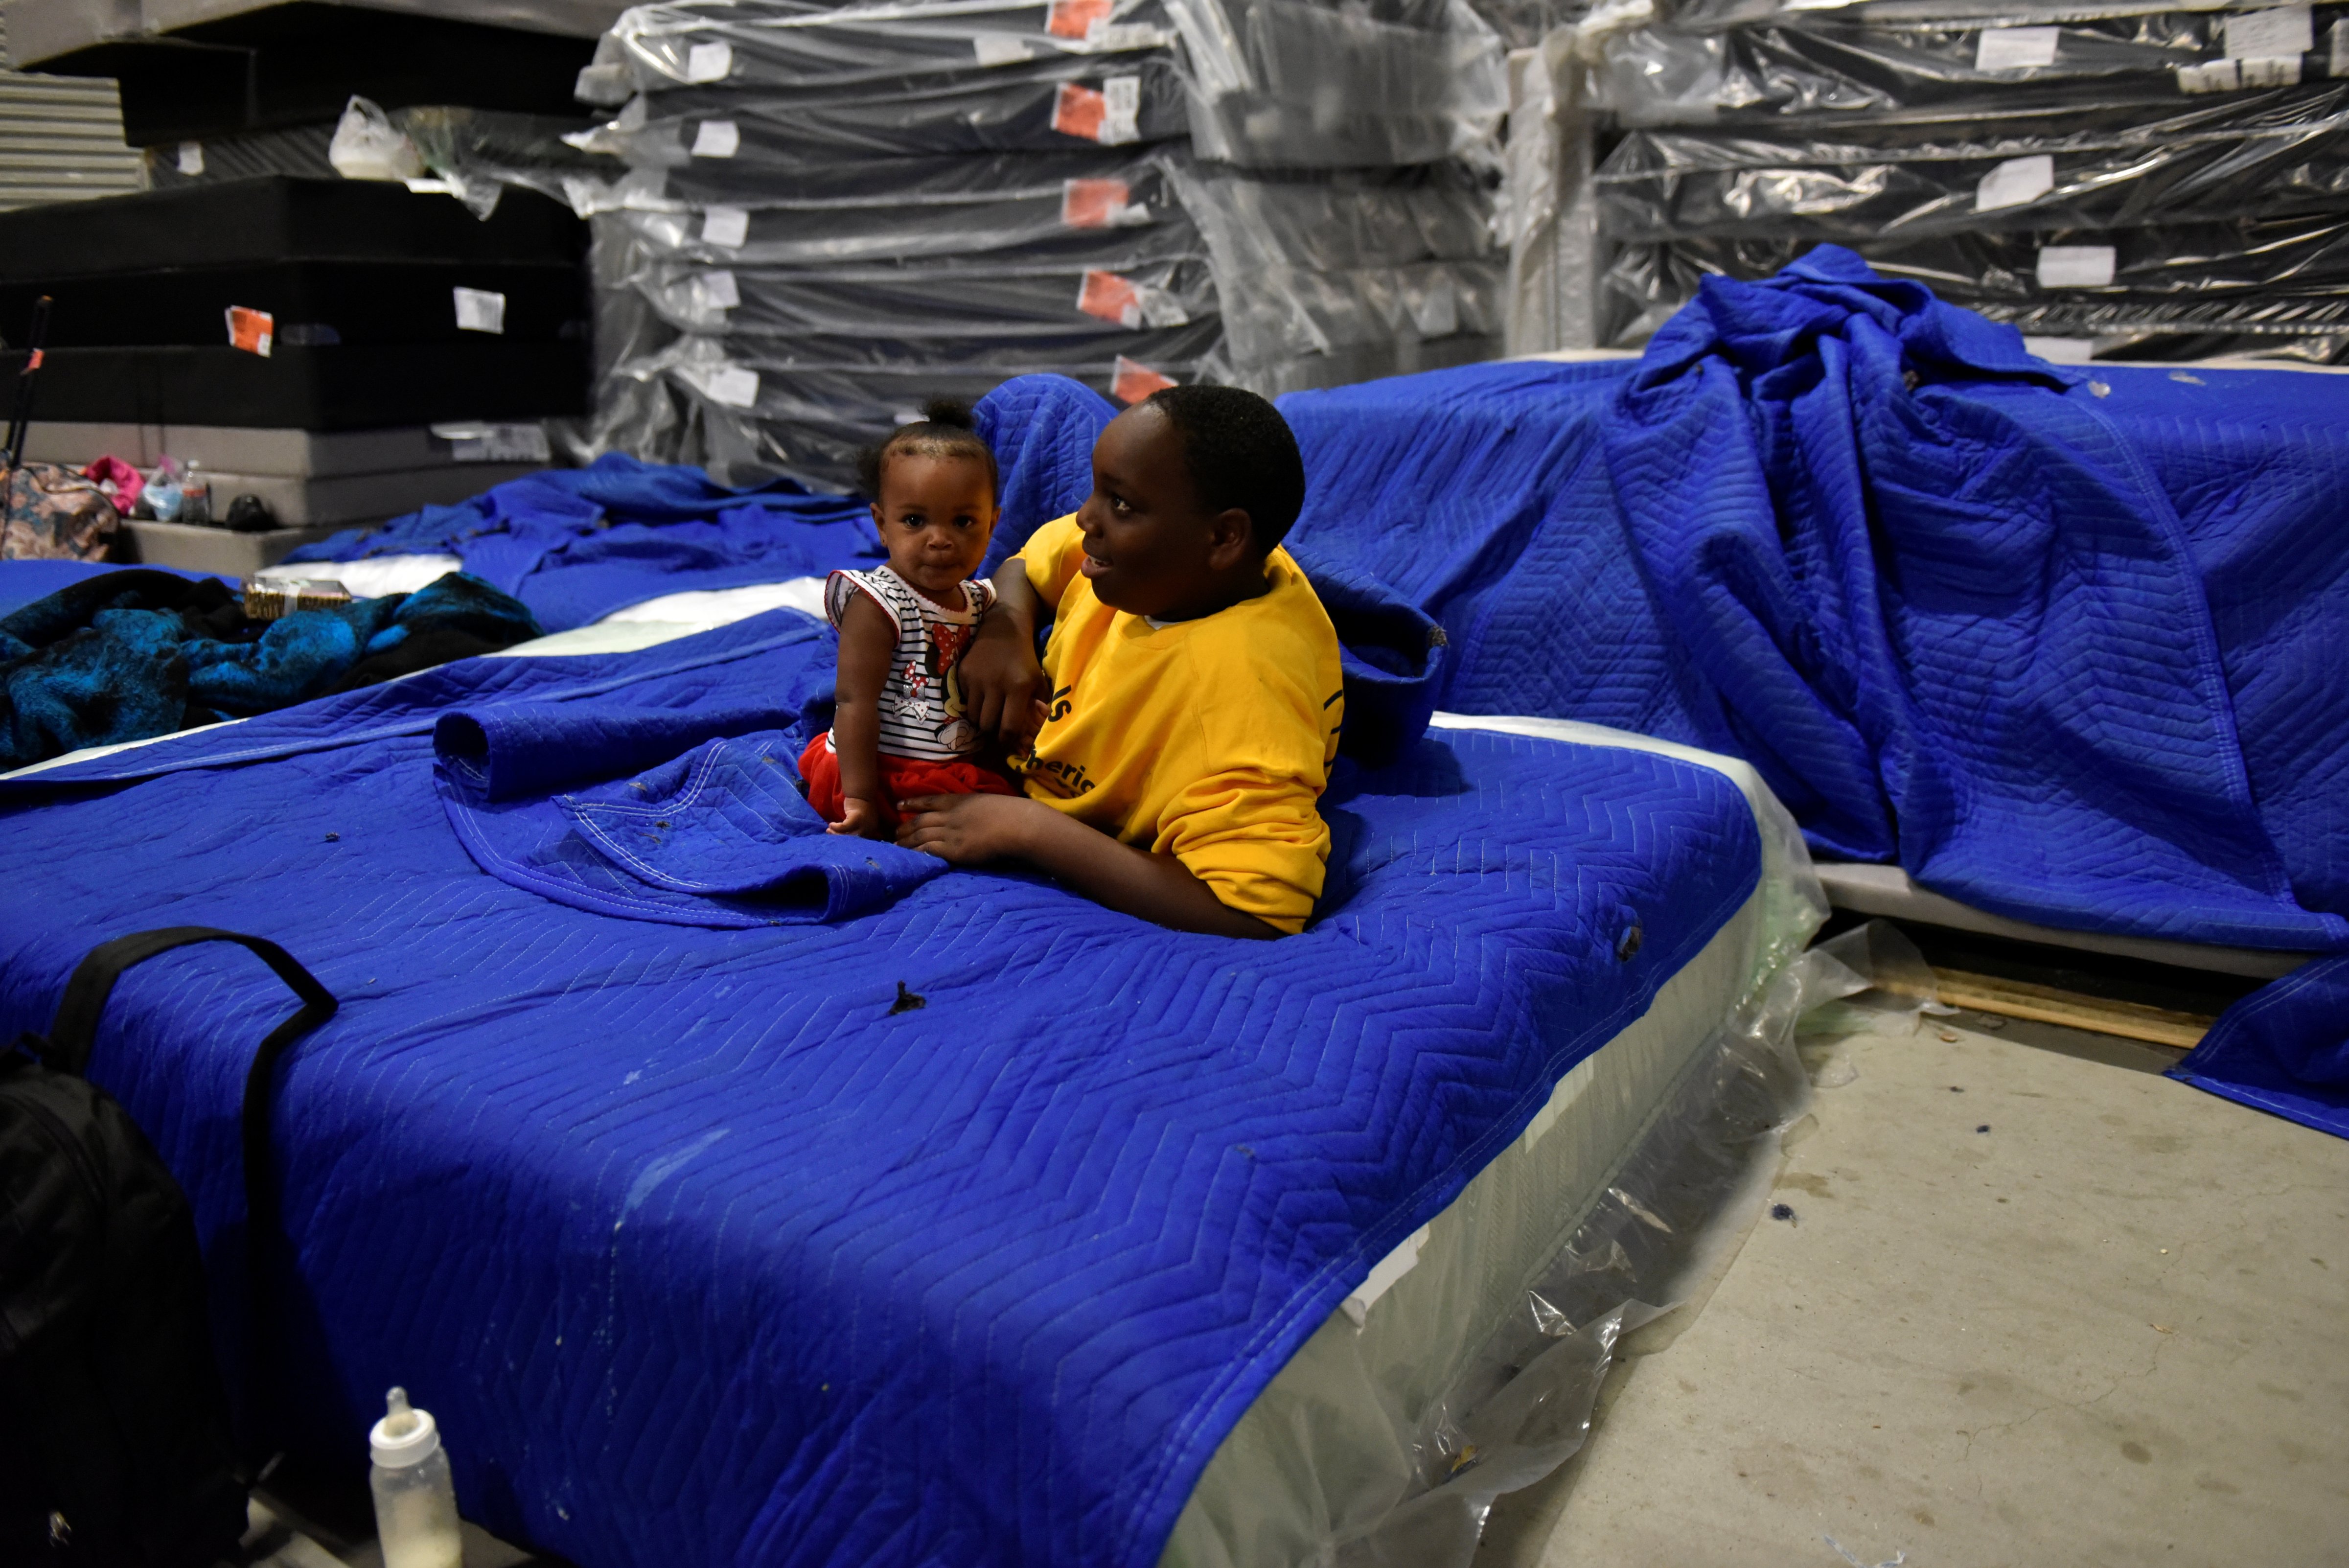 Jakobe Thomas plays with his sister Journey Thomas, 1, in the warehouse at Gallery Furniture where they have been staying after evacuating their flooded home over the weekend, in Houston, Texas, U.S., August 29, 2017. REUTERS/Nick Oxford - RTX3DVUW (Nick Oxford—REUTERS)